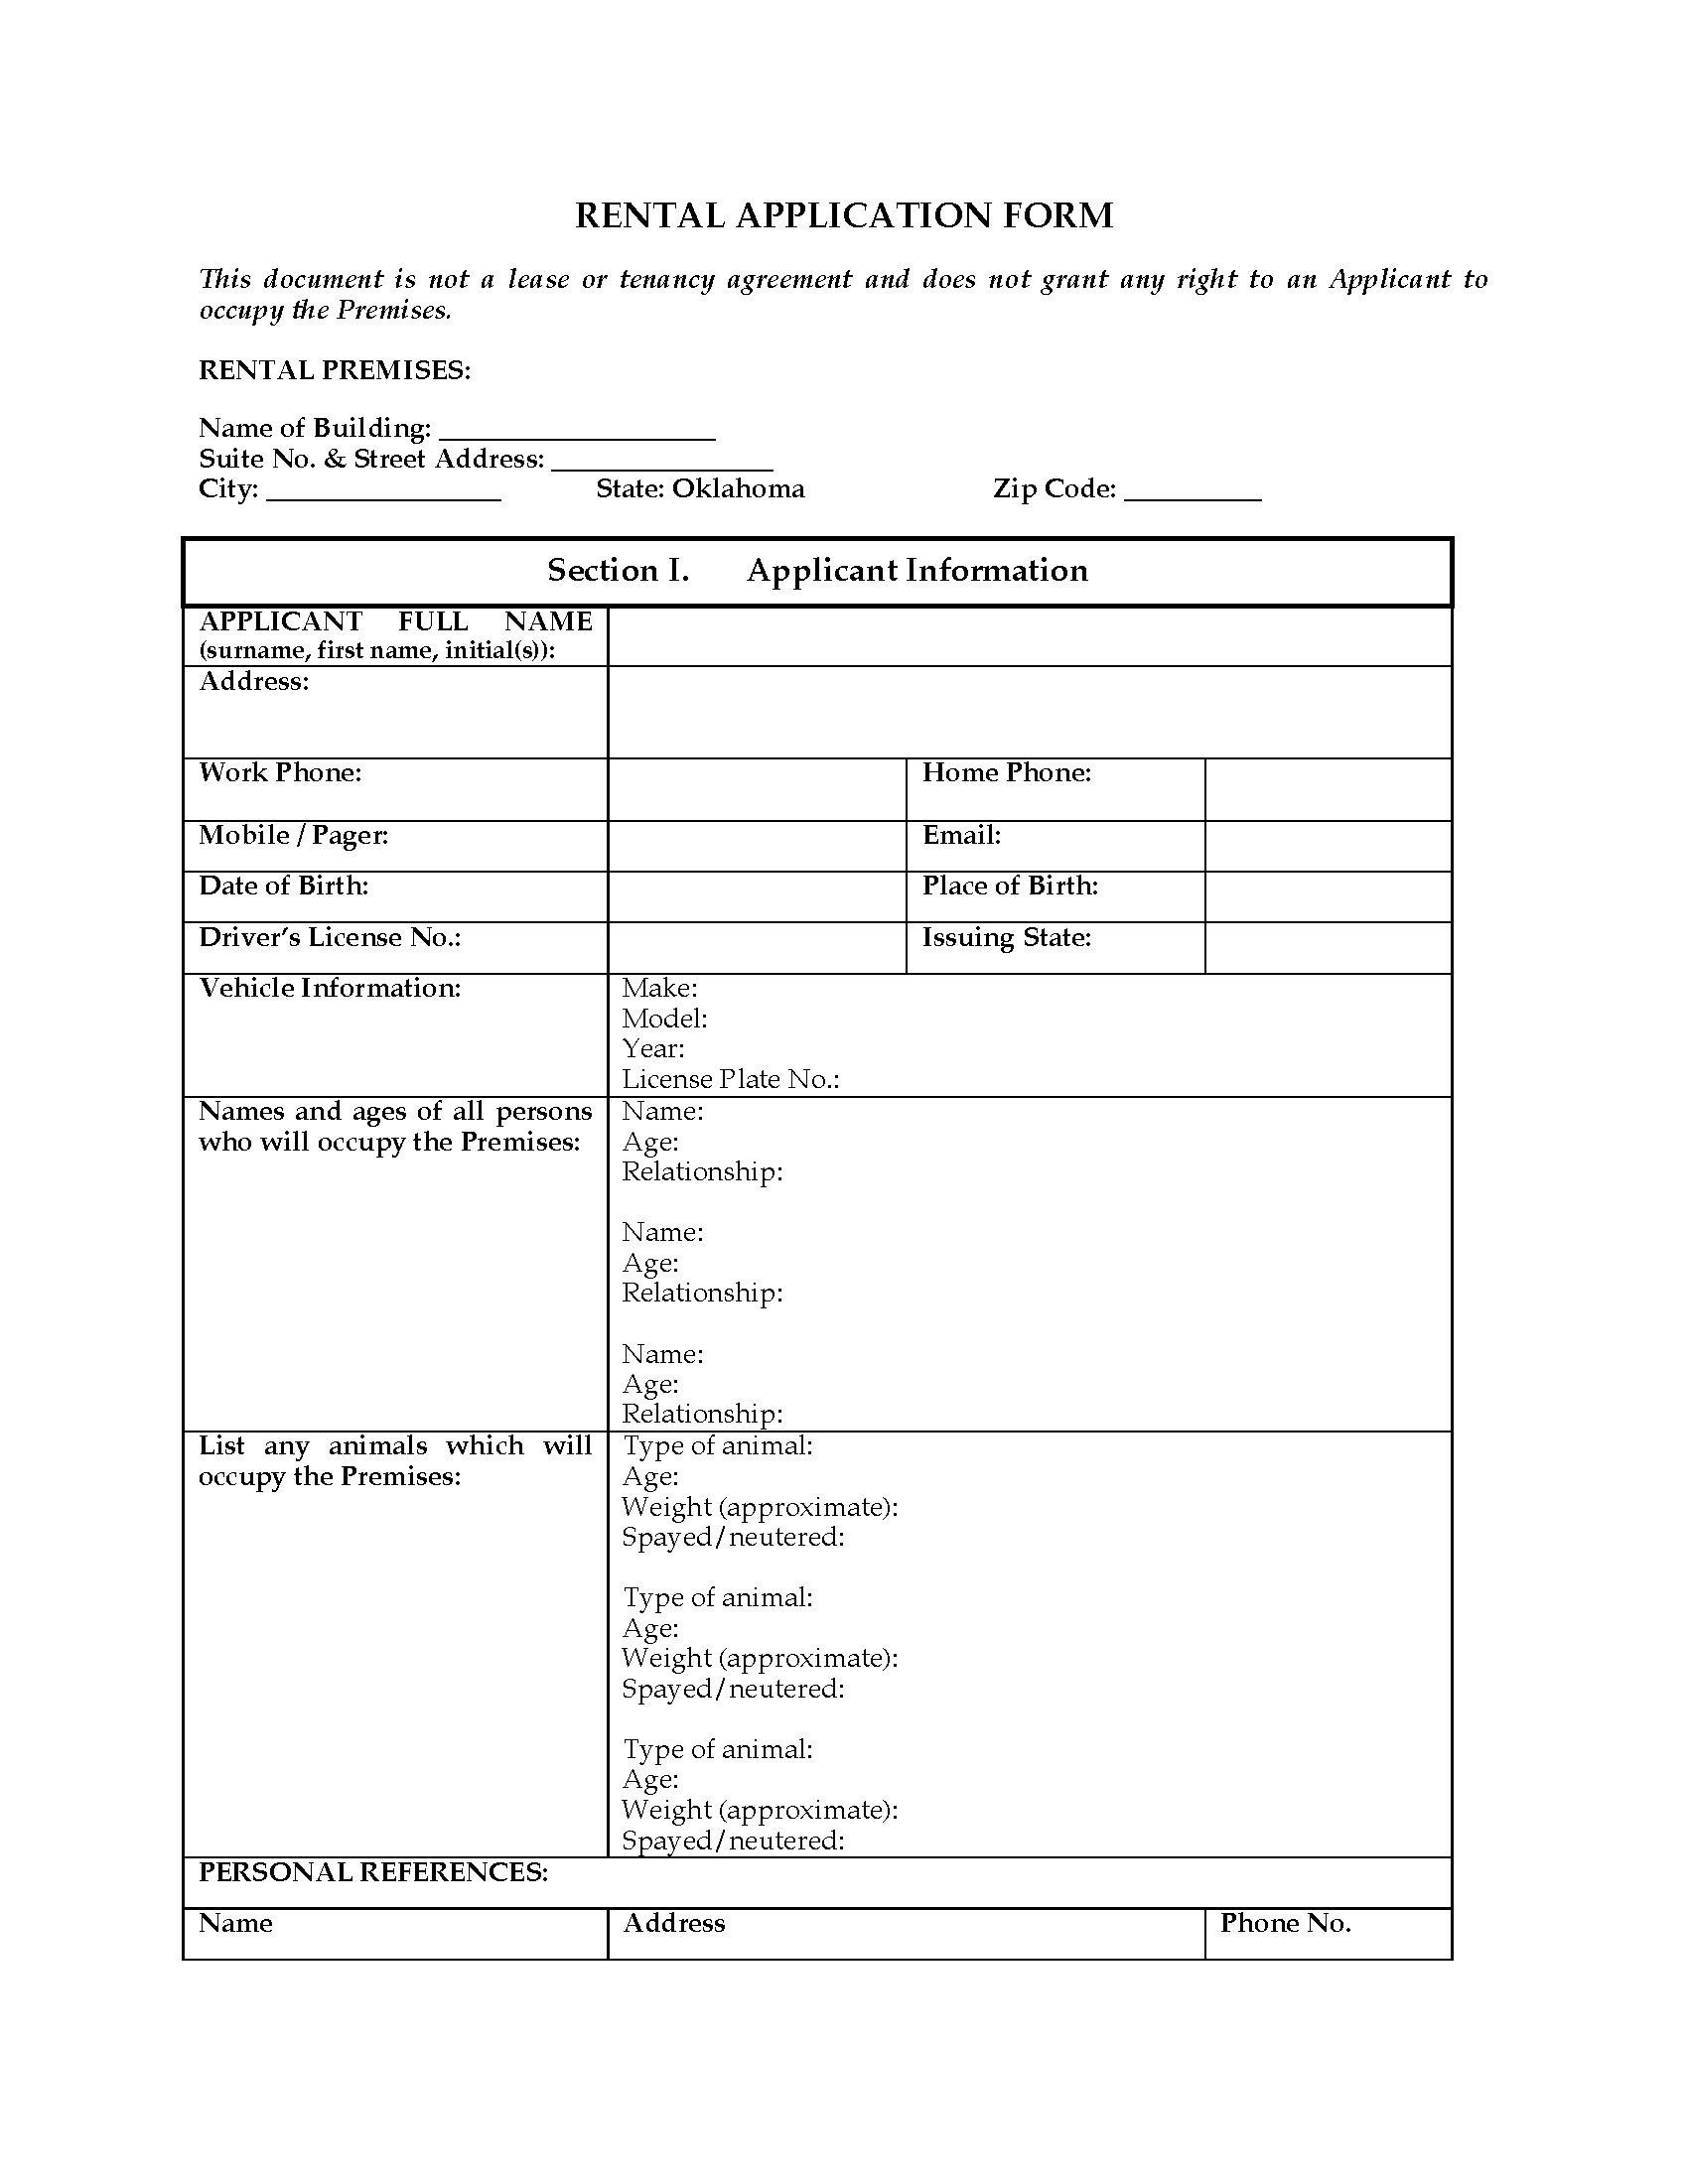 oklahoma-rental-application-form-legal-forms-and-business-templates